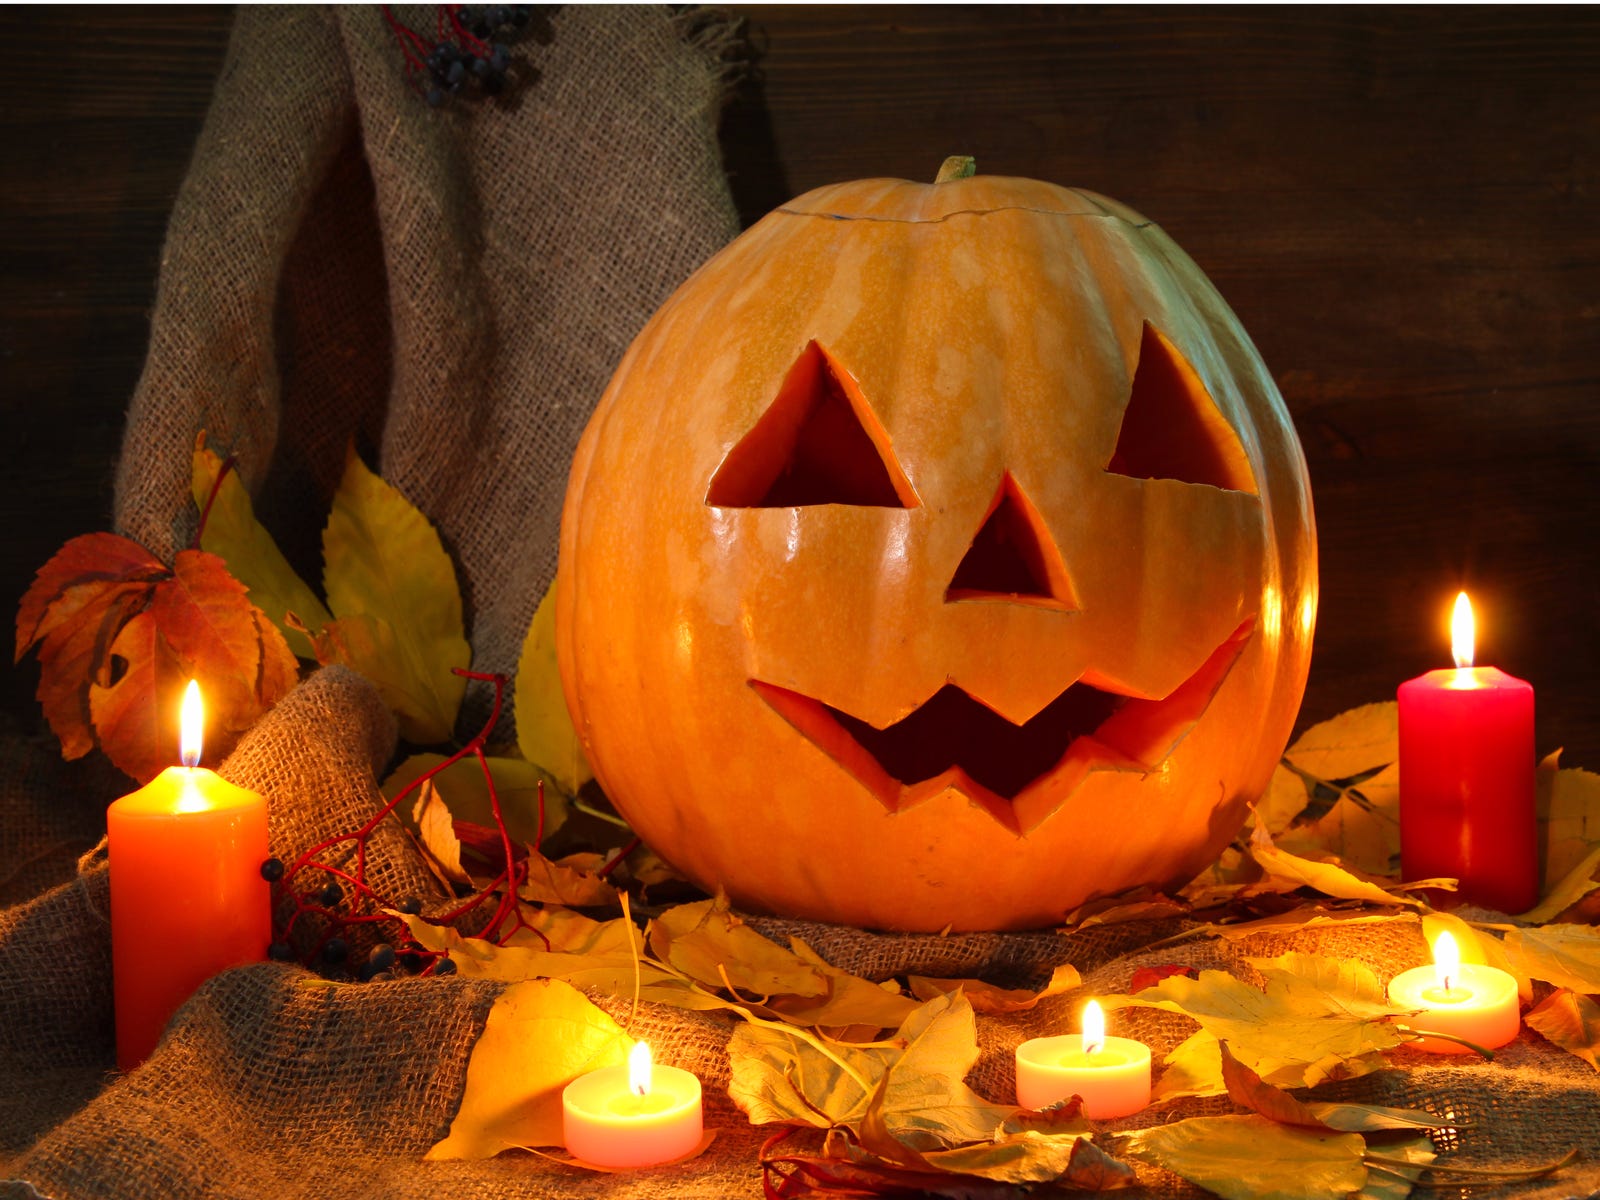 Six amazing pumpkin-carving ideas that don't require much skill - Blog ...